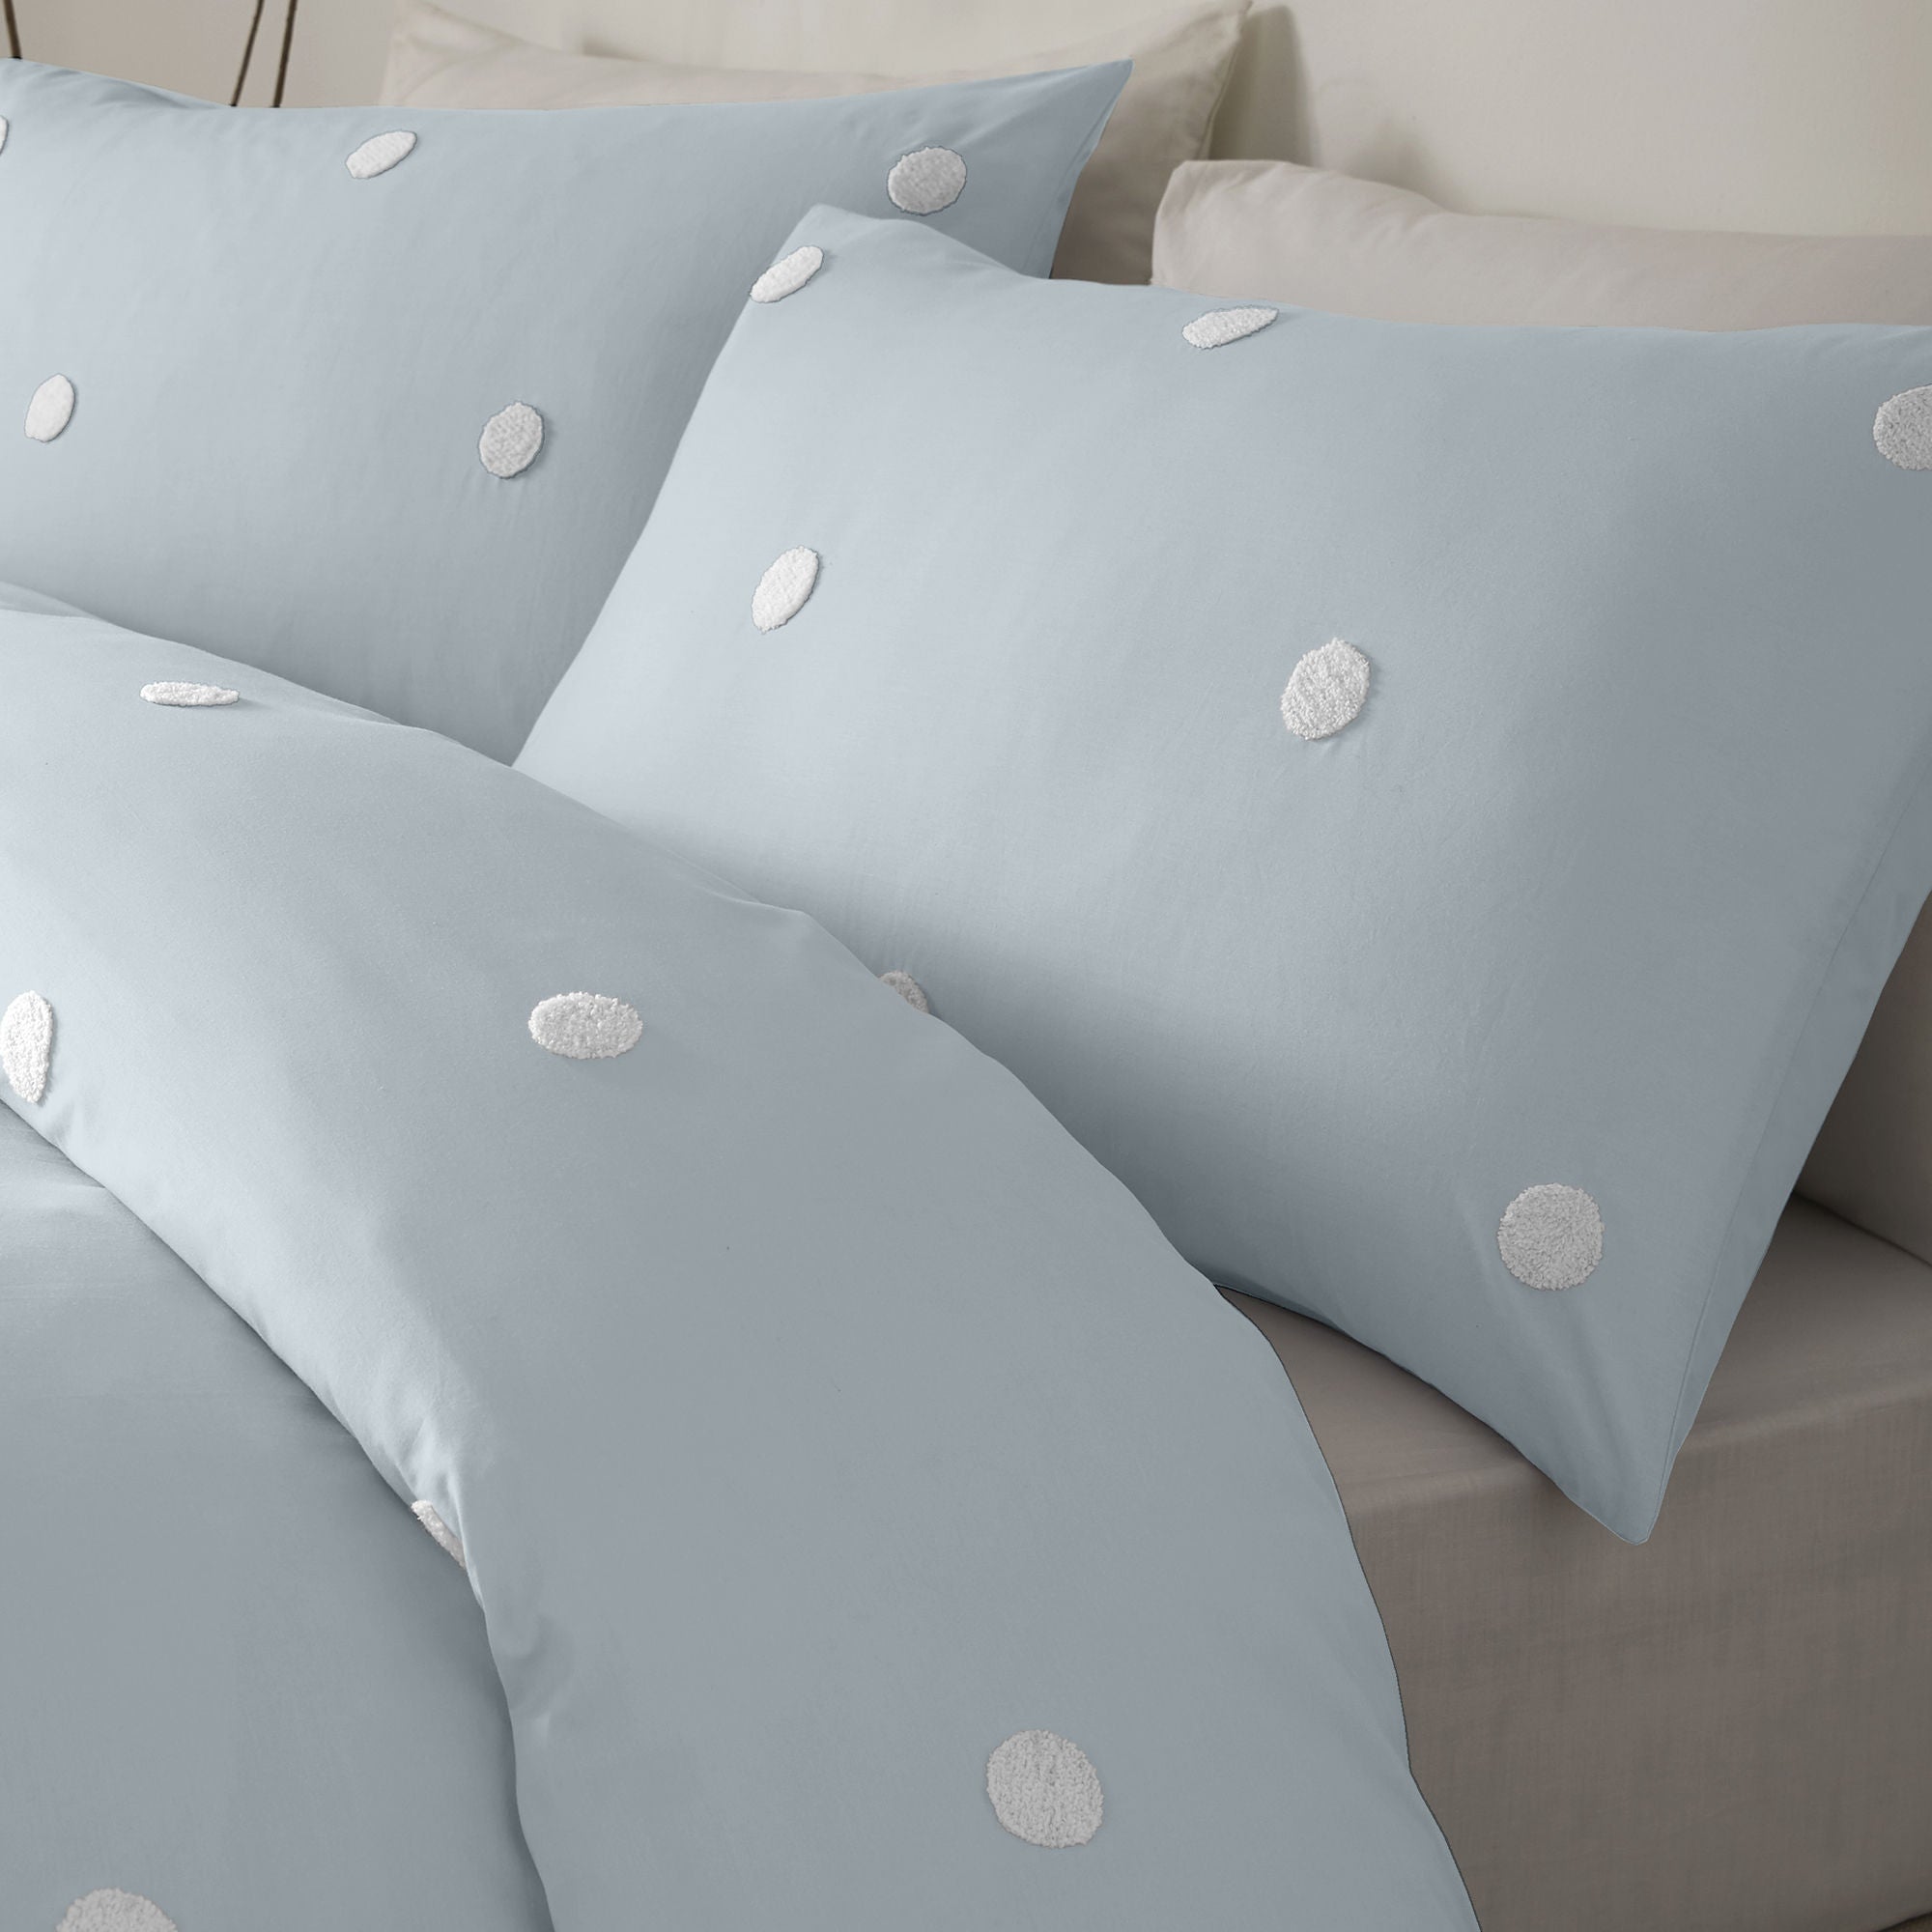 Dot Garden Duvet Cover Set by Appletree Boutique in Duck Egg with White Dots - Duvet Cover Set - Appletree Boutique